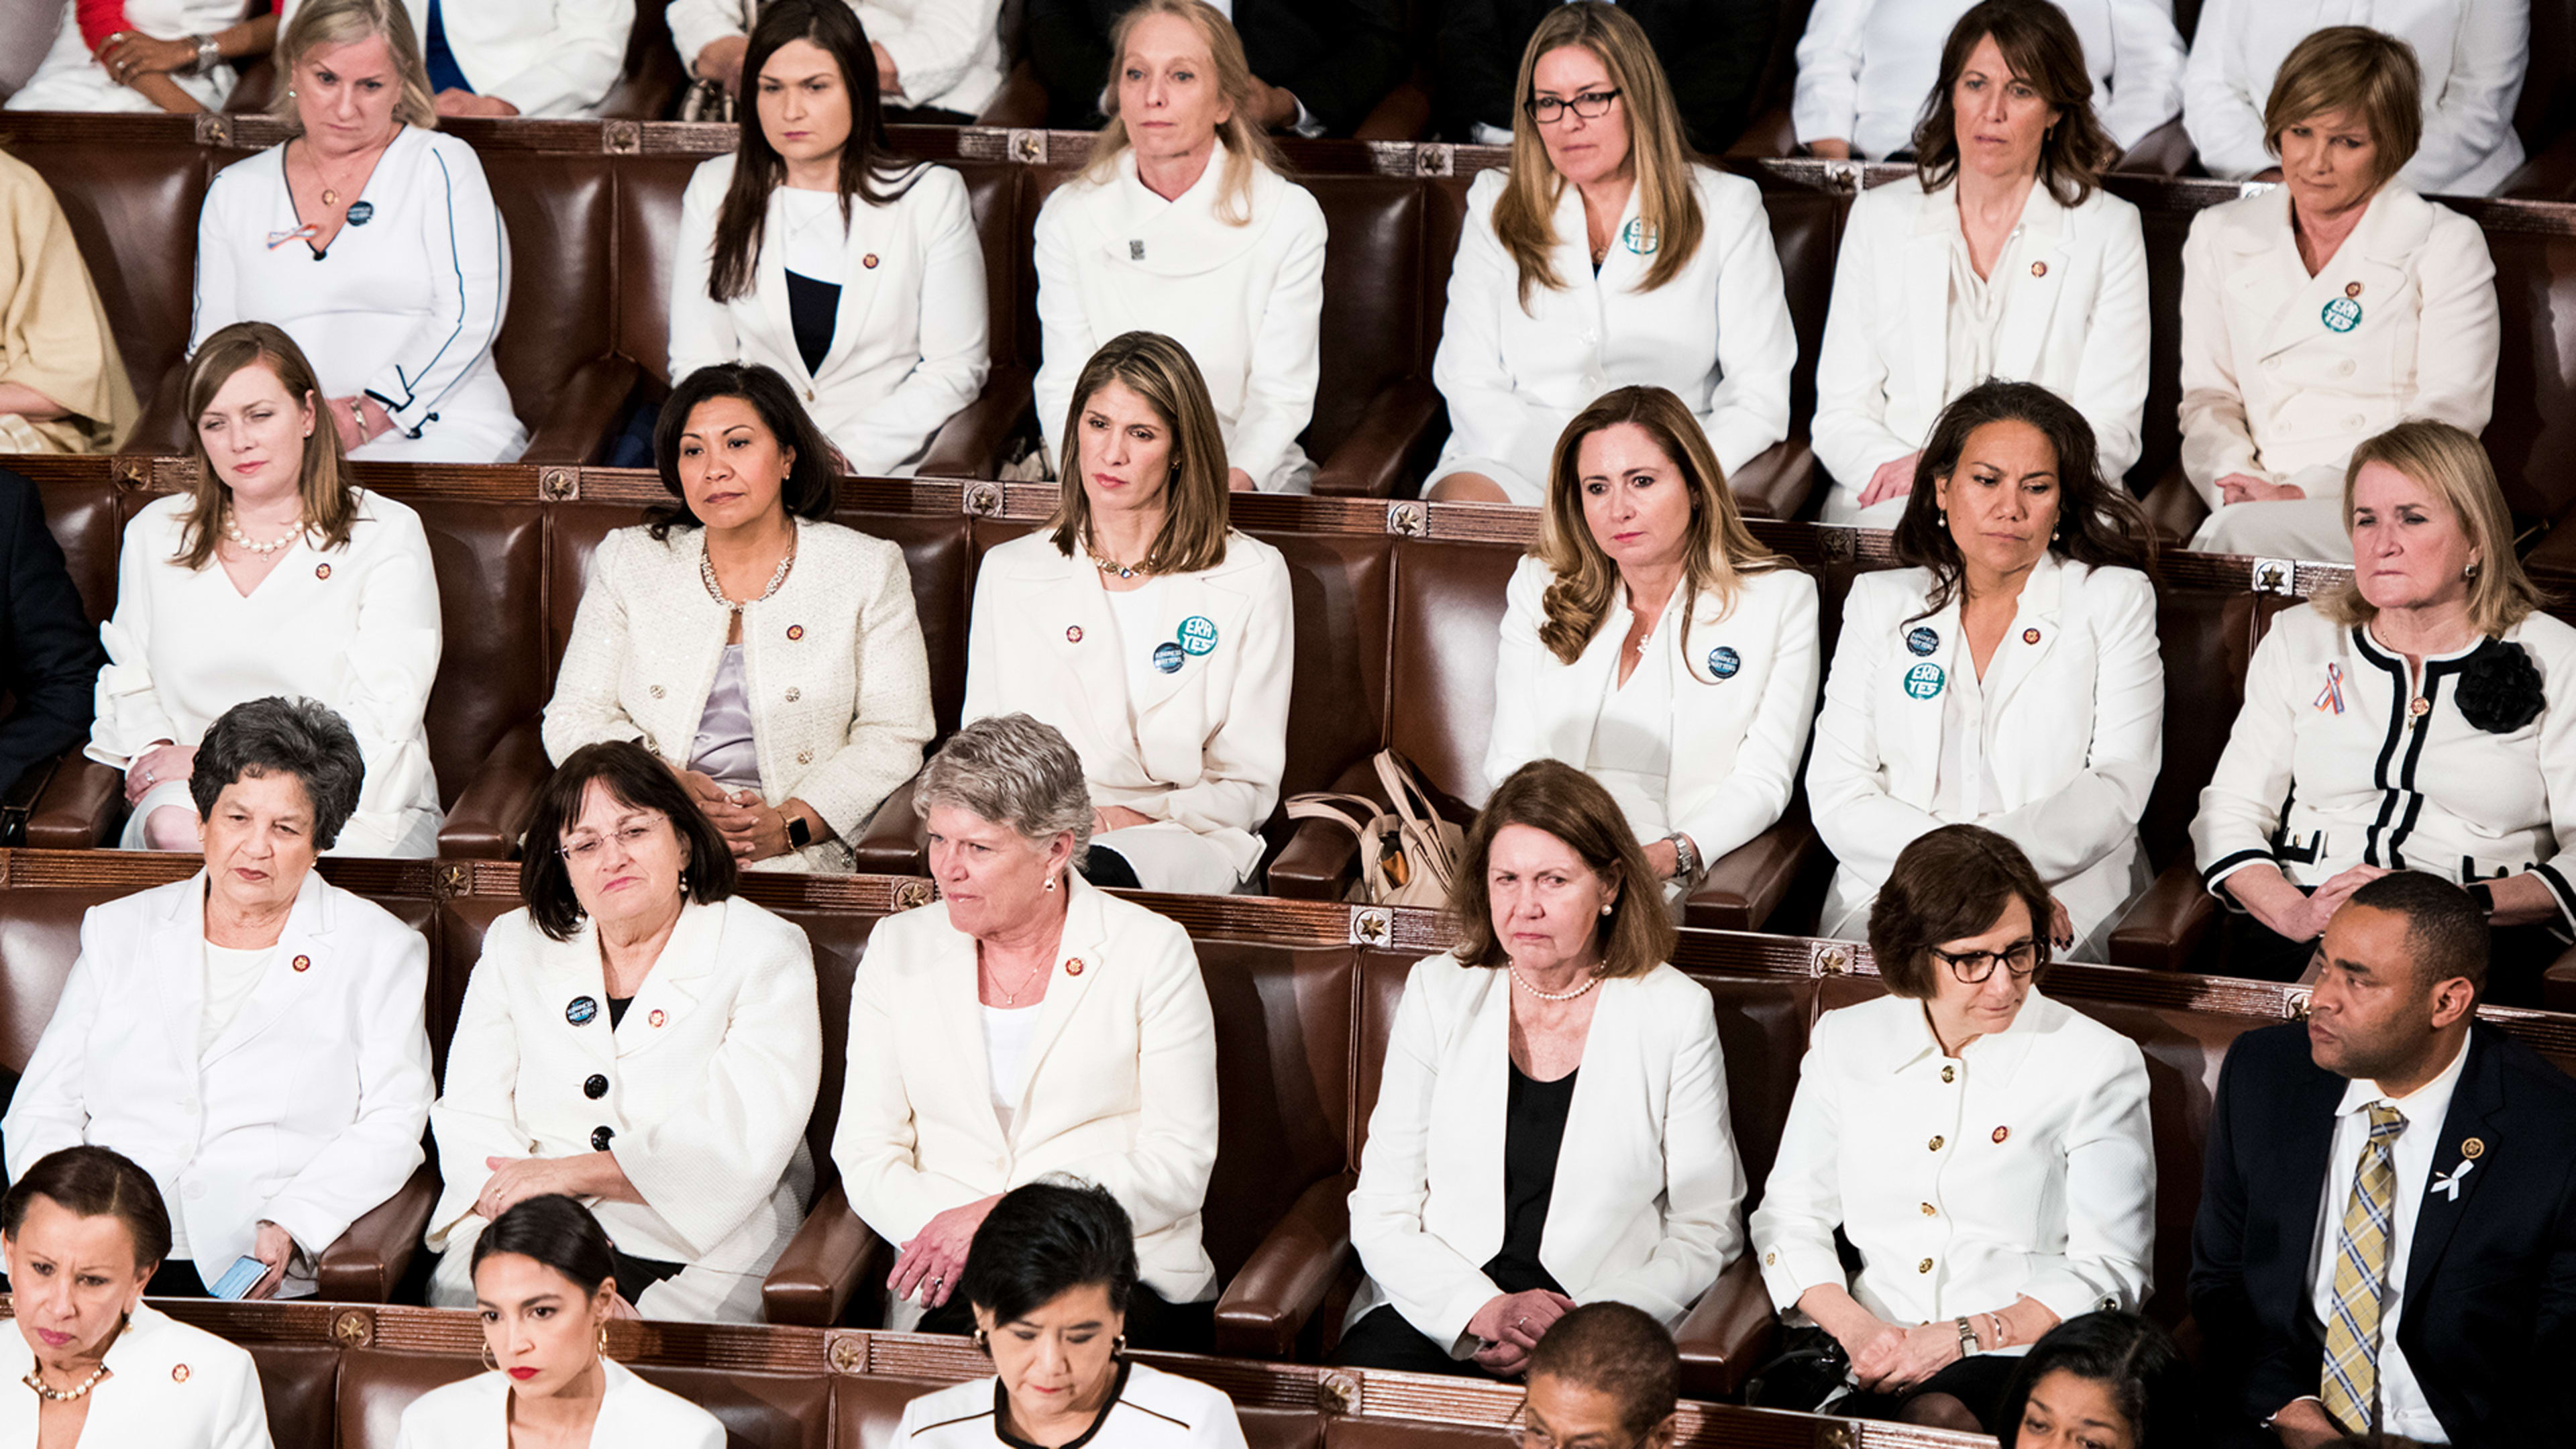 Progressive women are wearing white. They should wear purple and yellow, too